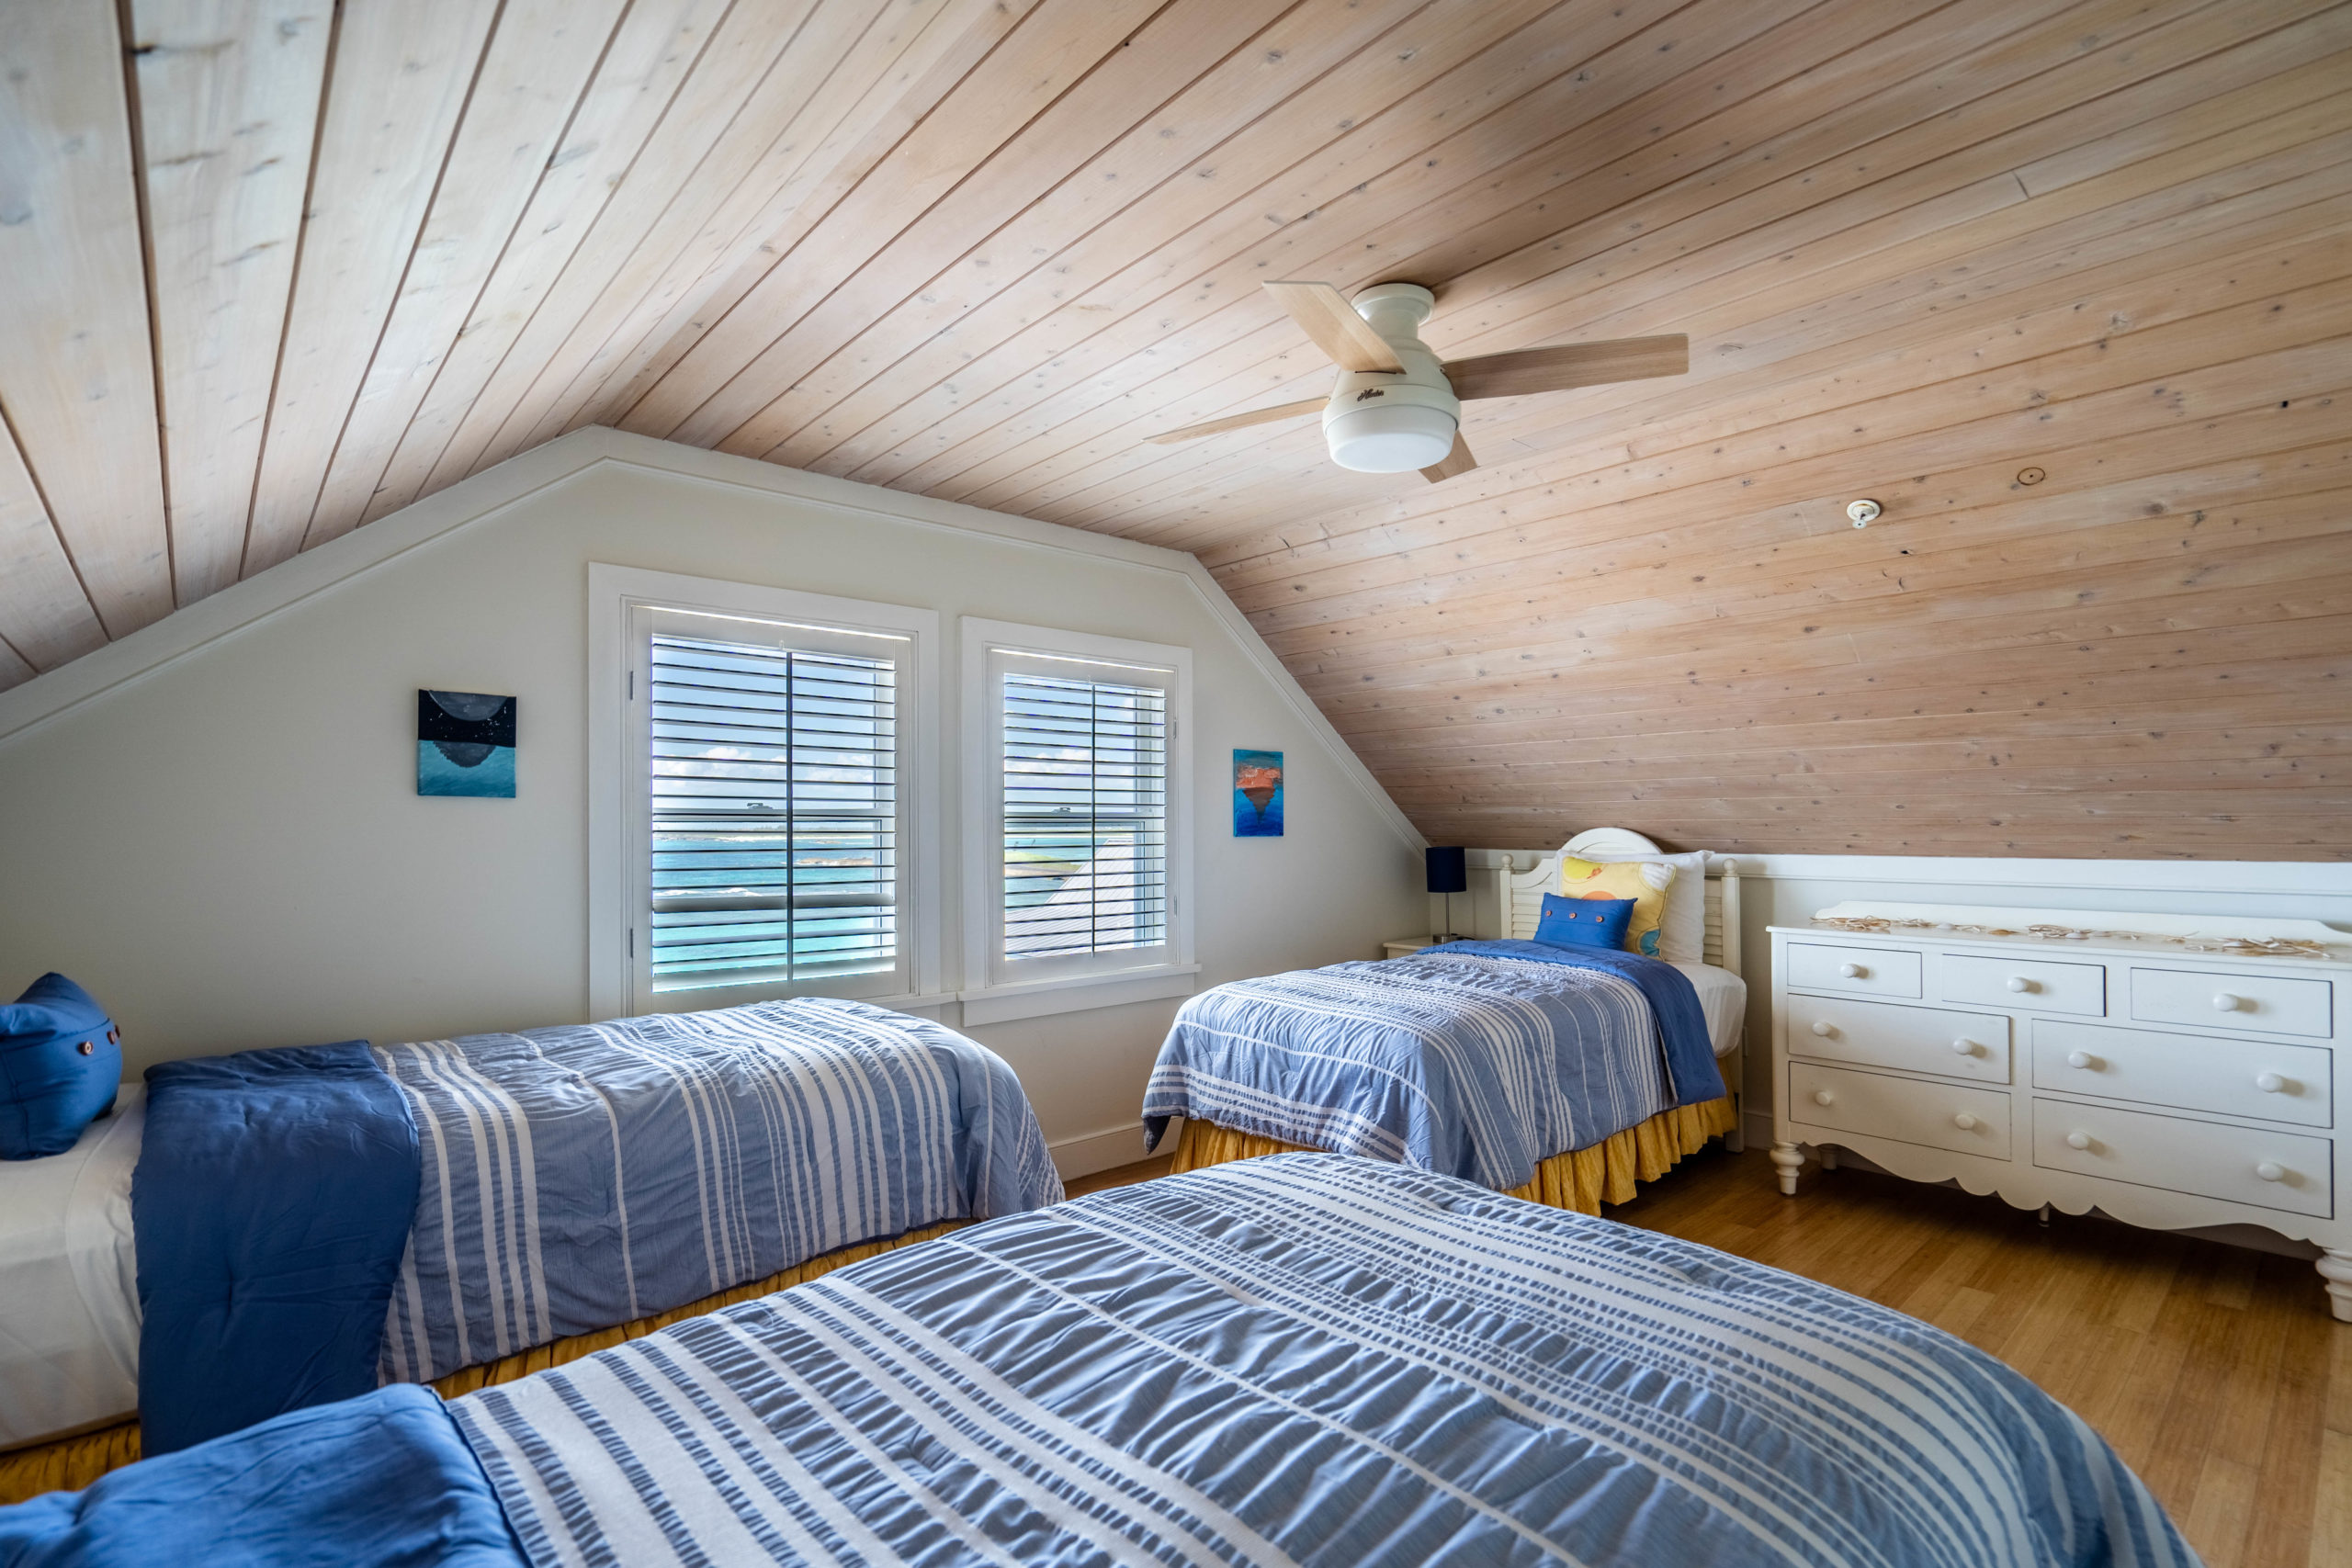 Cozy bedroom view from a beachfront house on Winding Bay Bahamas